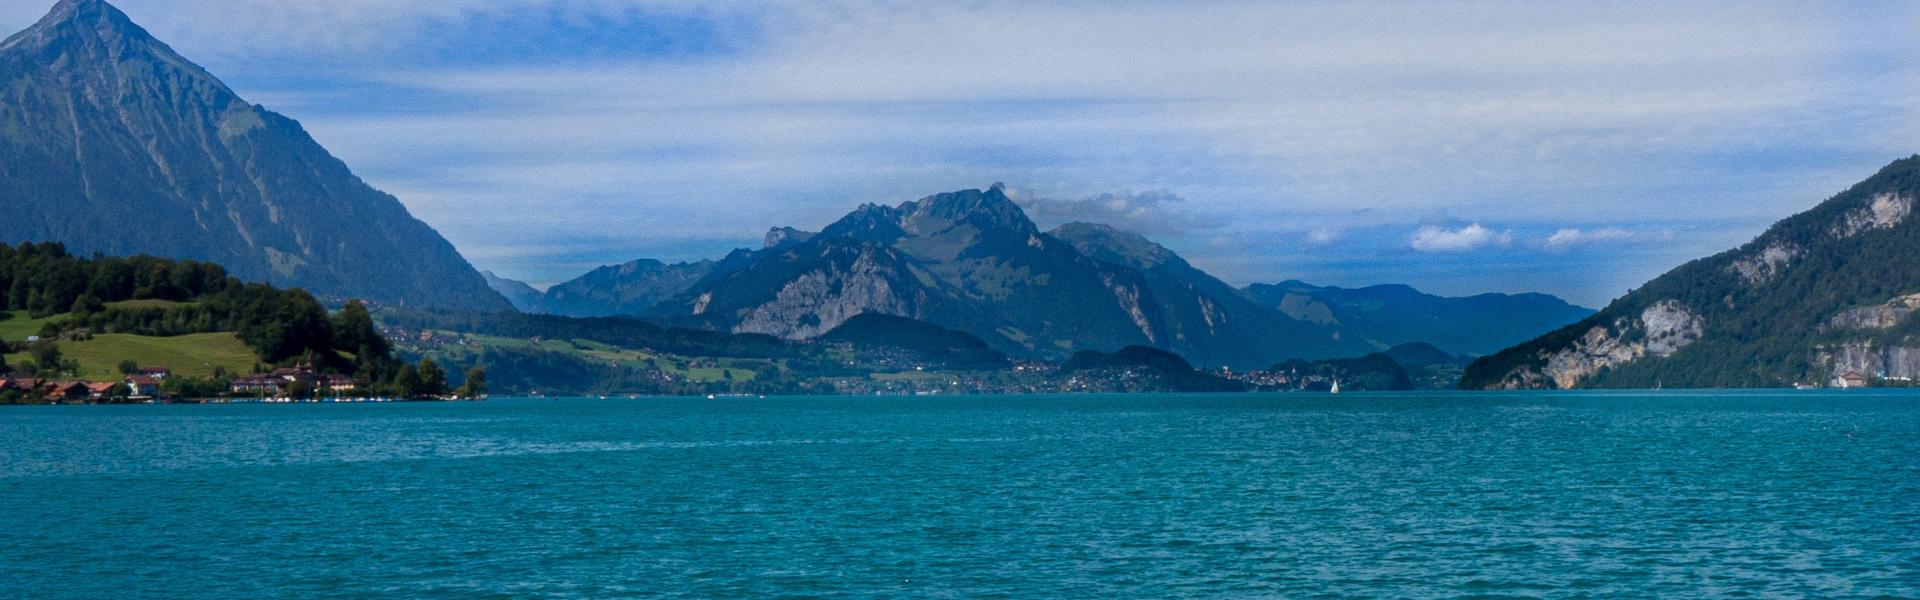 Thunersee Scenic View